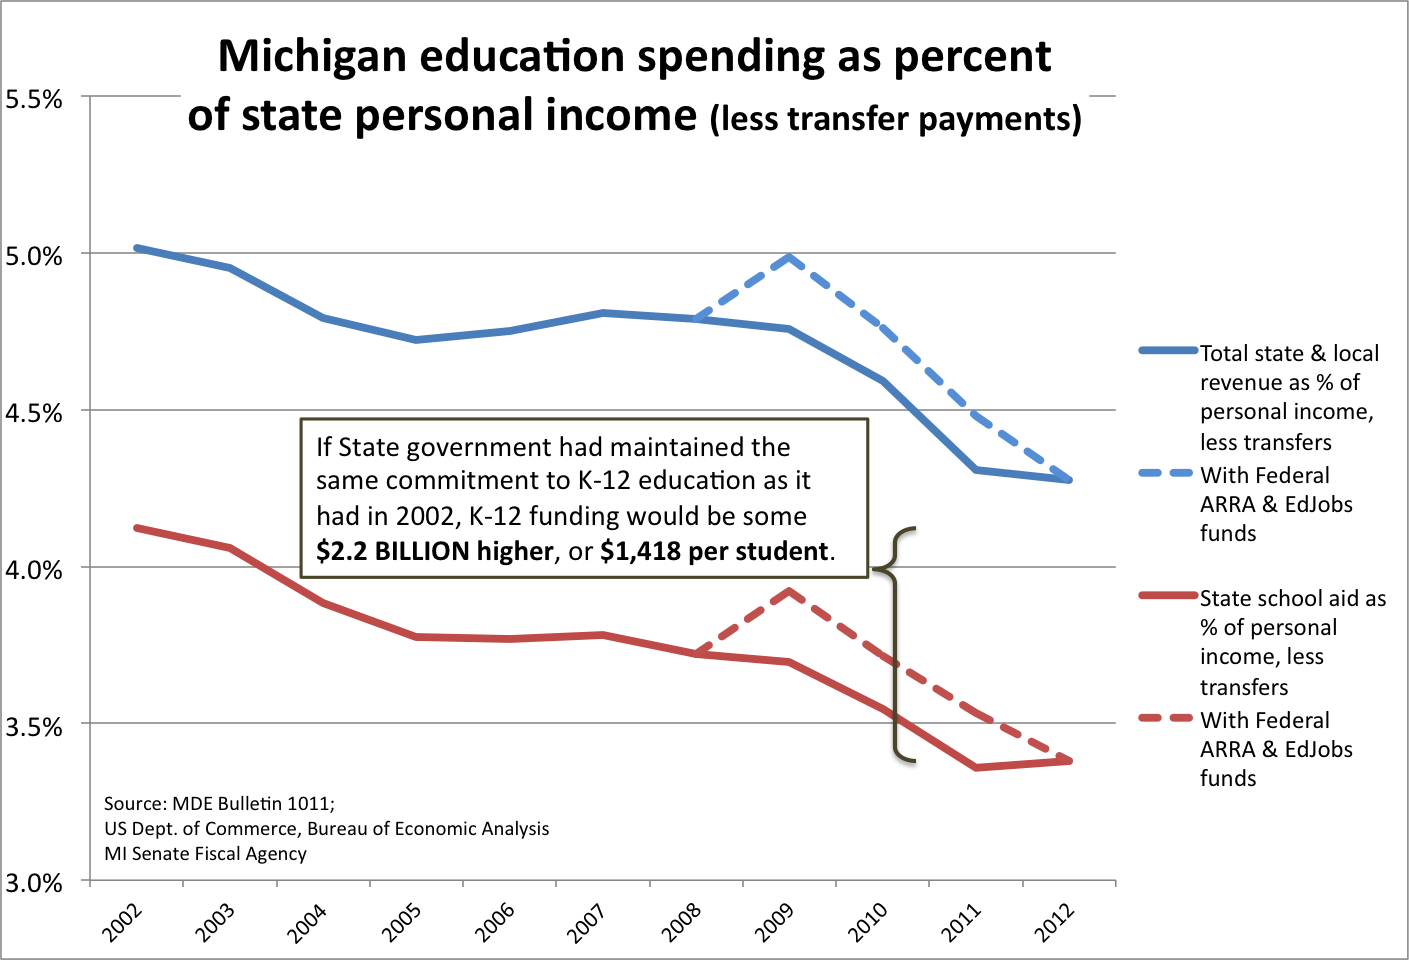 State spending on K-12 as share of MI personal income